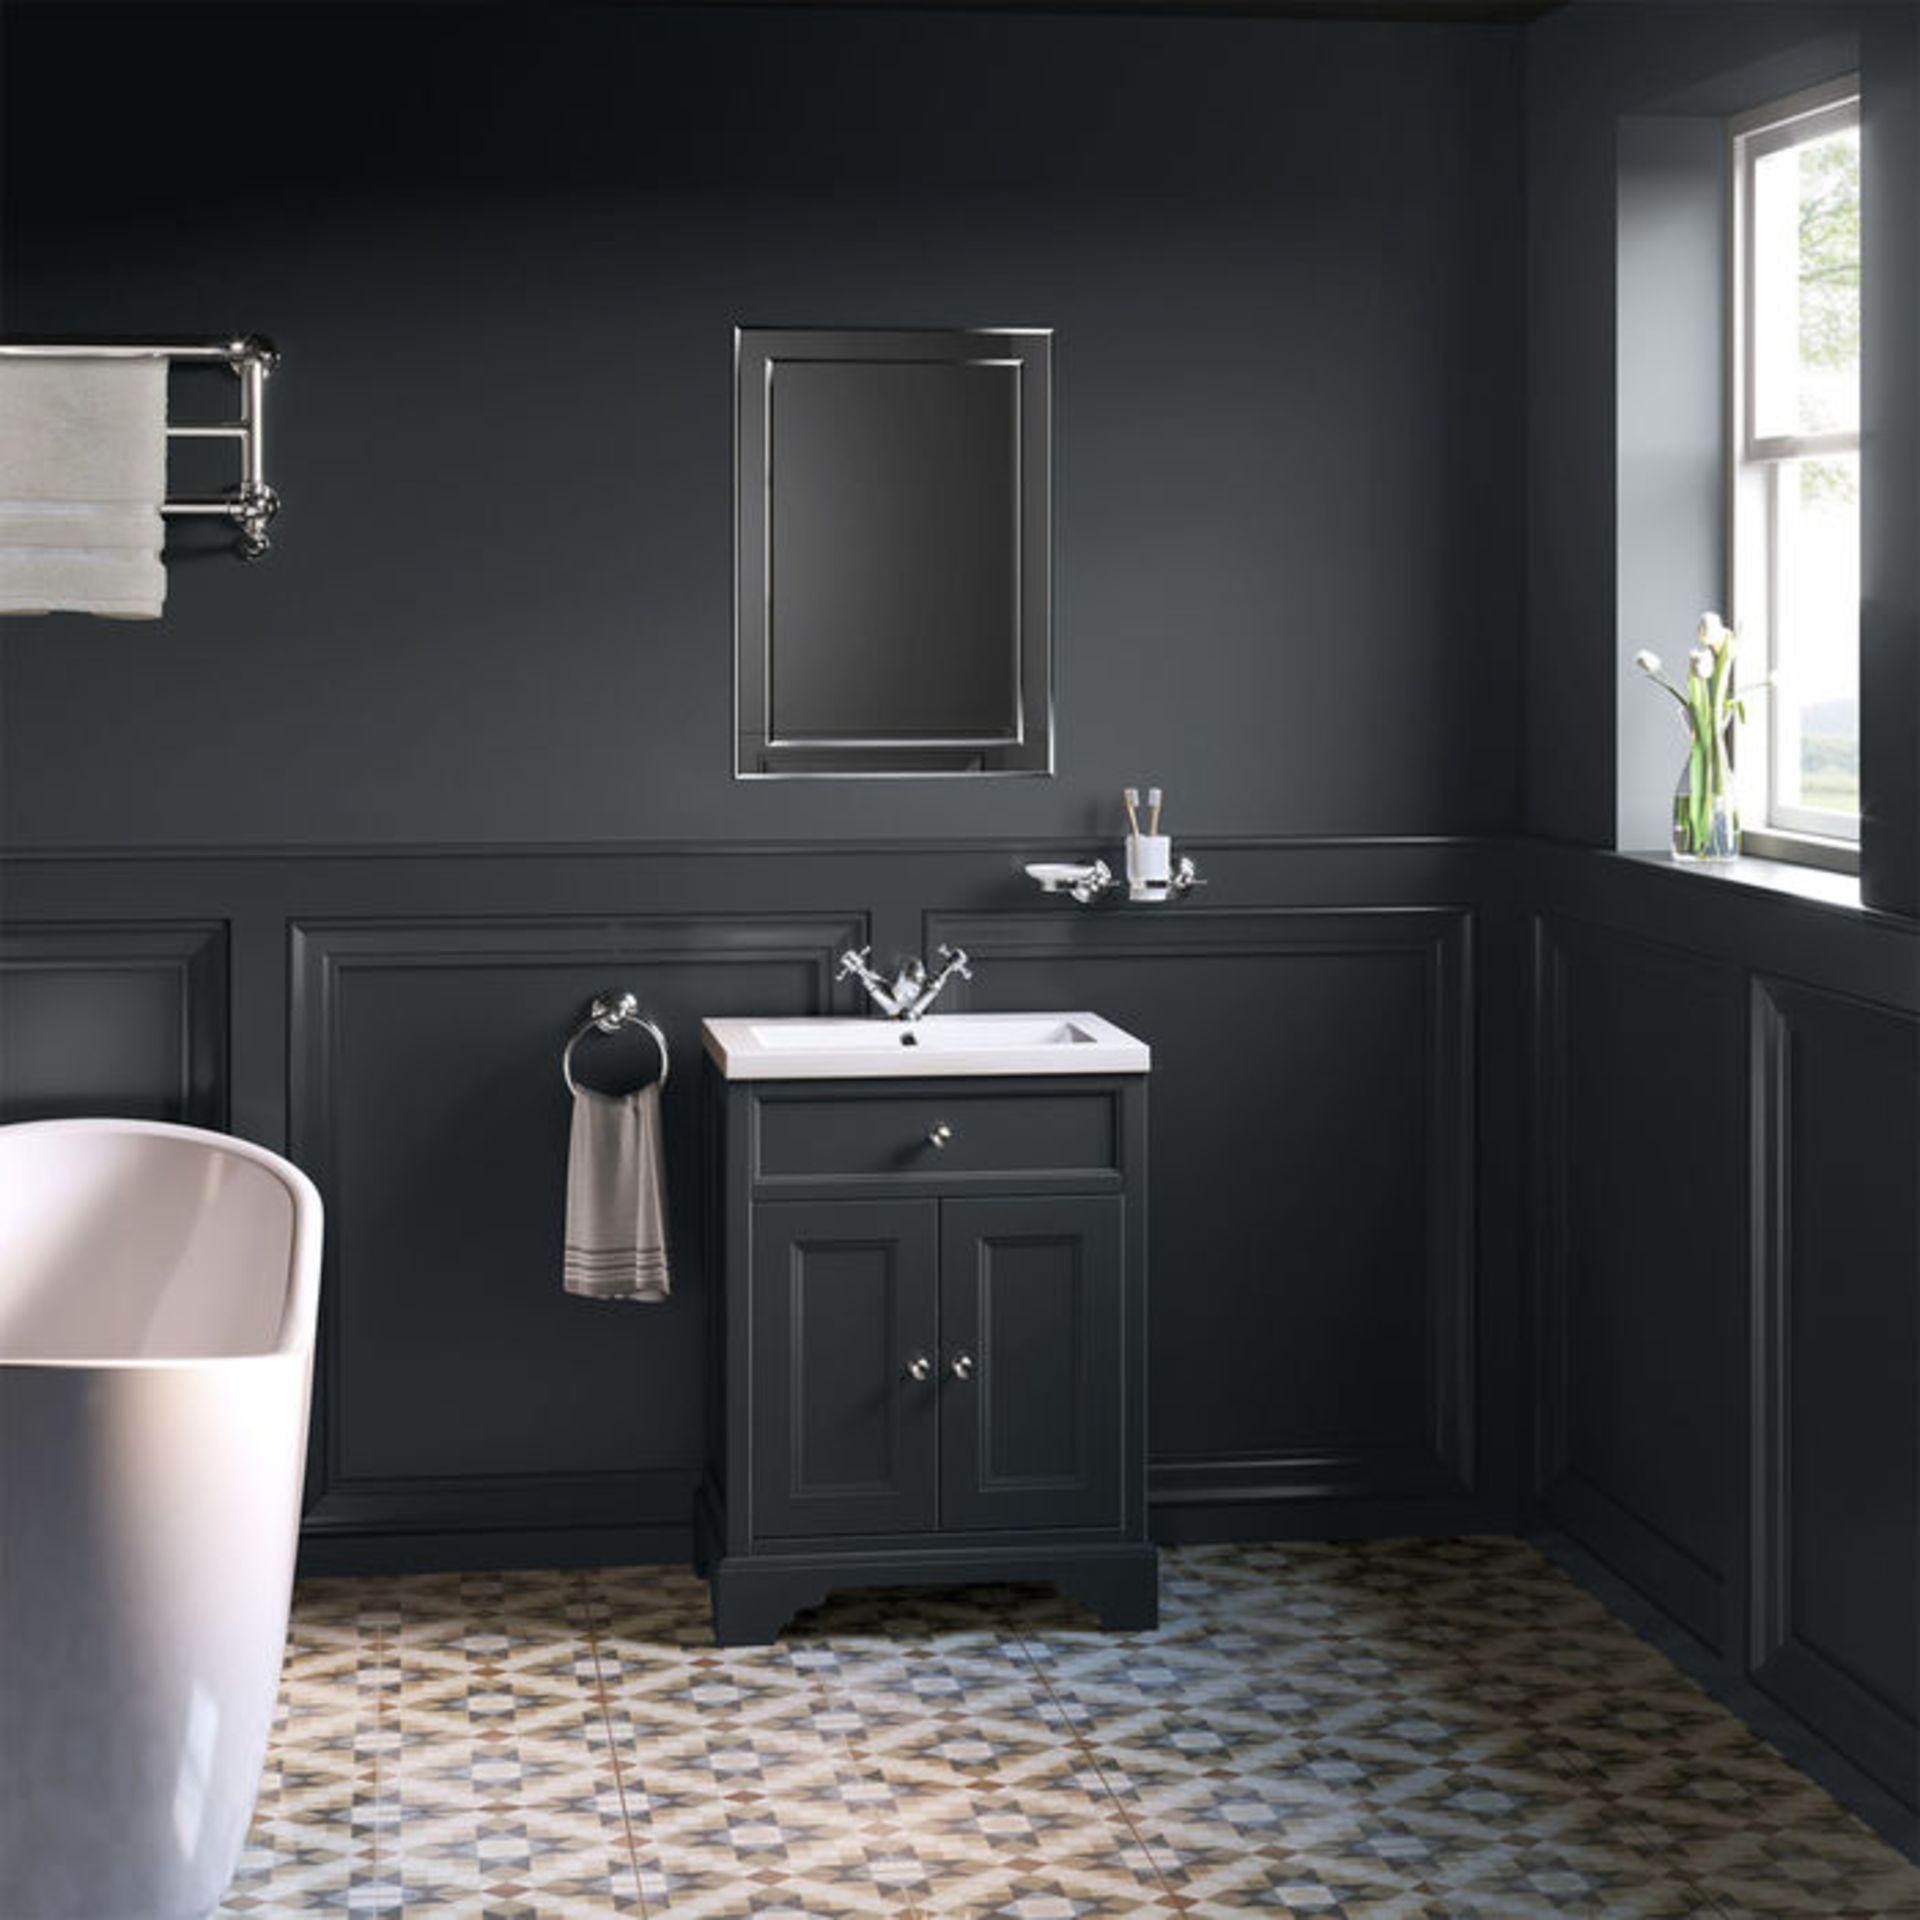 NEW & BOXED 600mm Loxley Charcoal Vanity Unit - Floor Standing. RRP £1,074.99.MF9002.Stunning - Image 2 of 3